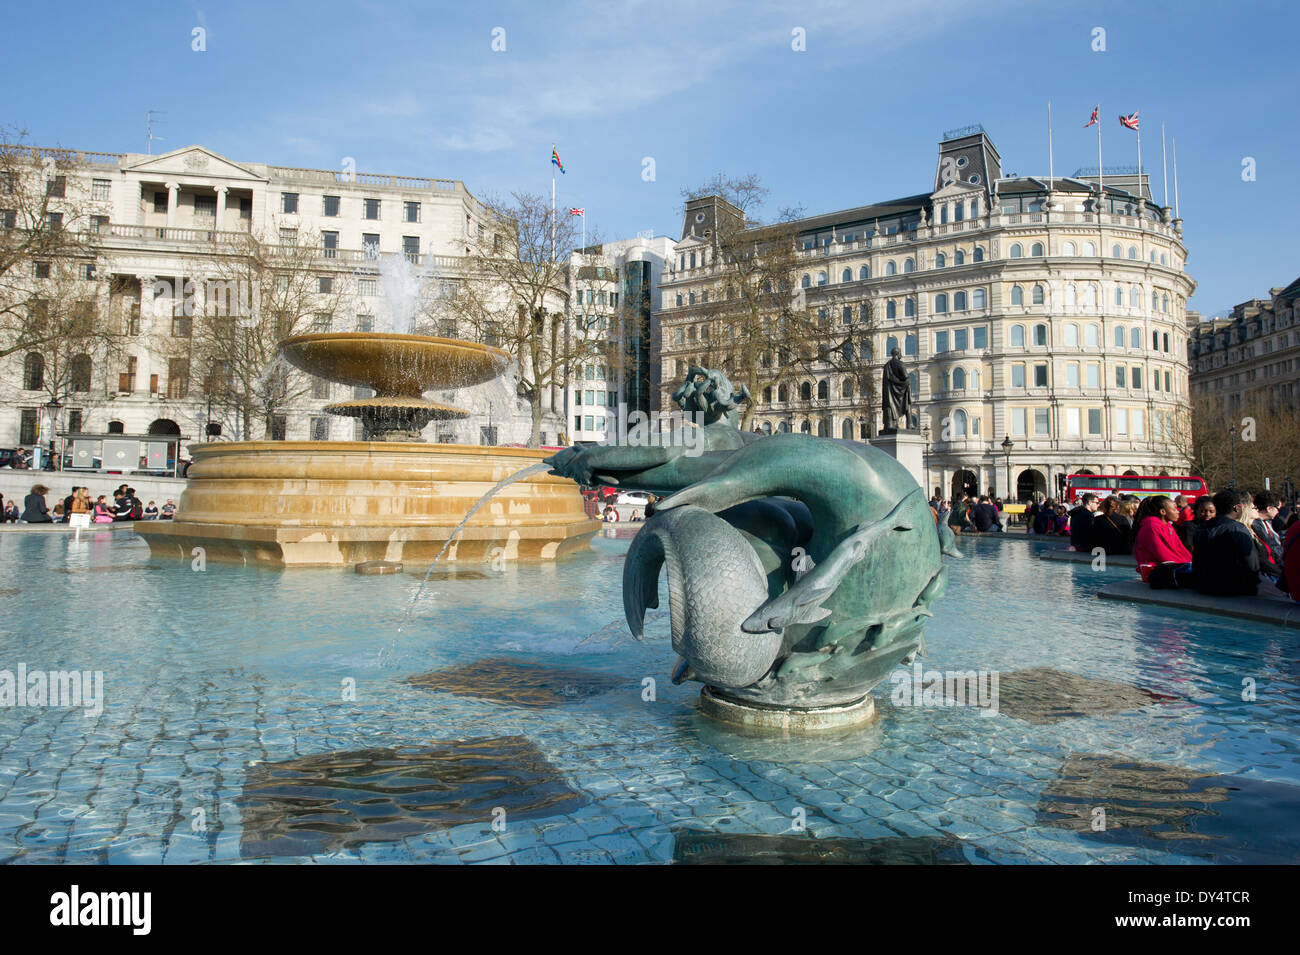 Iconic water fountain in the Trafalgar Square with the dolphin statue ...